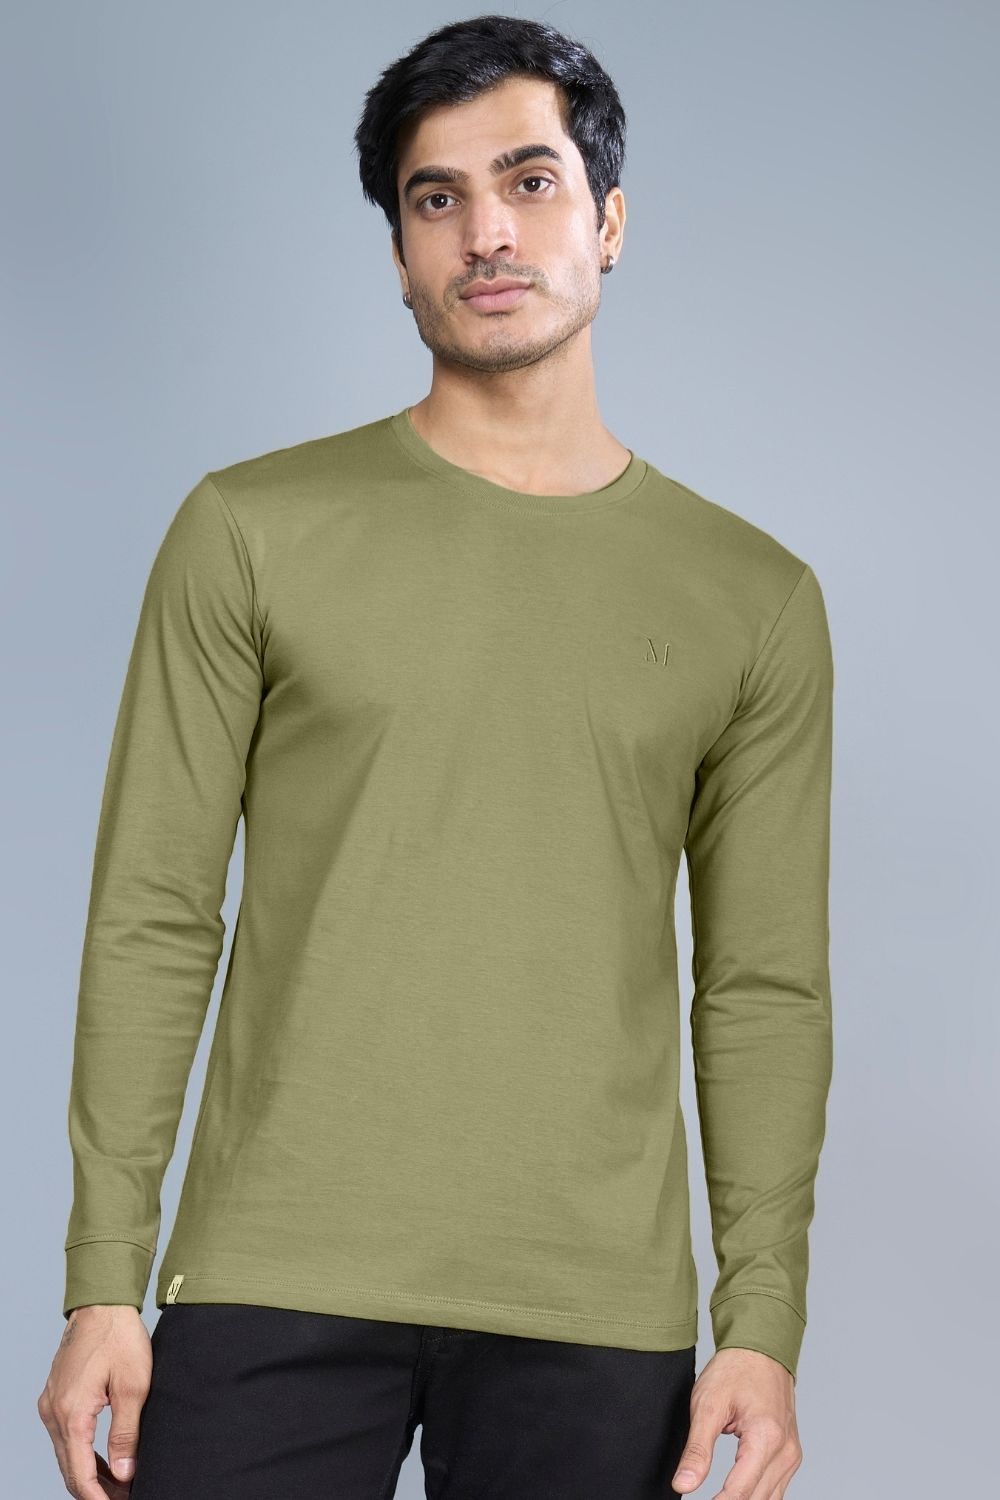 Get full-sleeve cotton t-shirts for men online